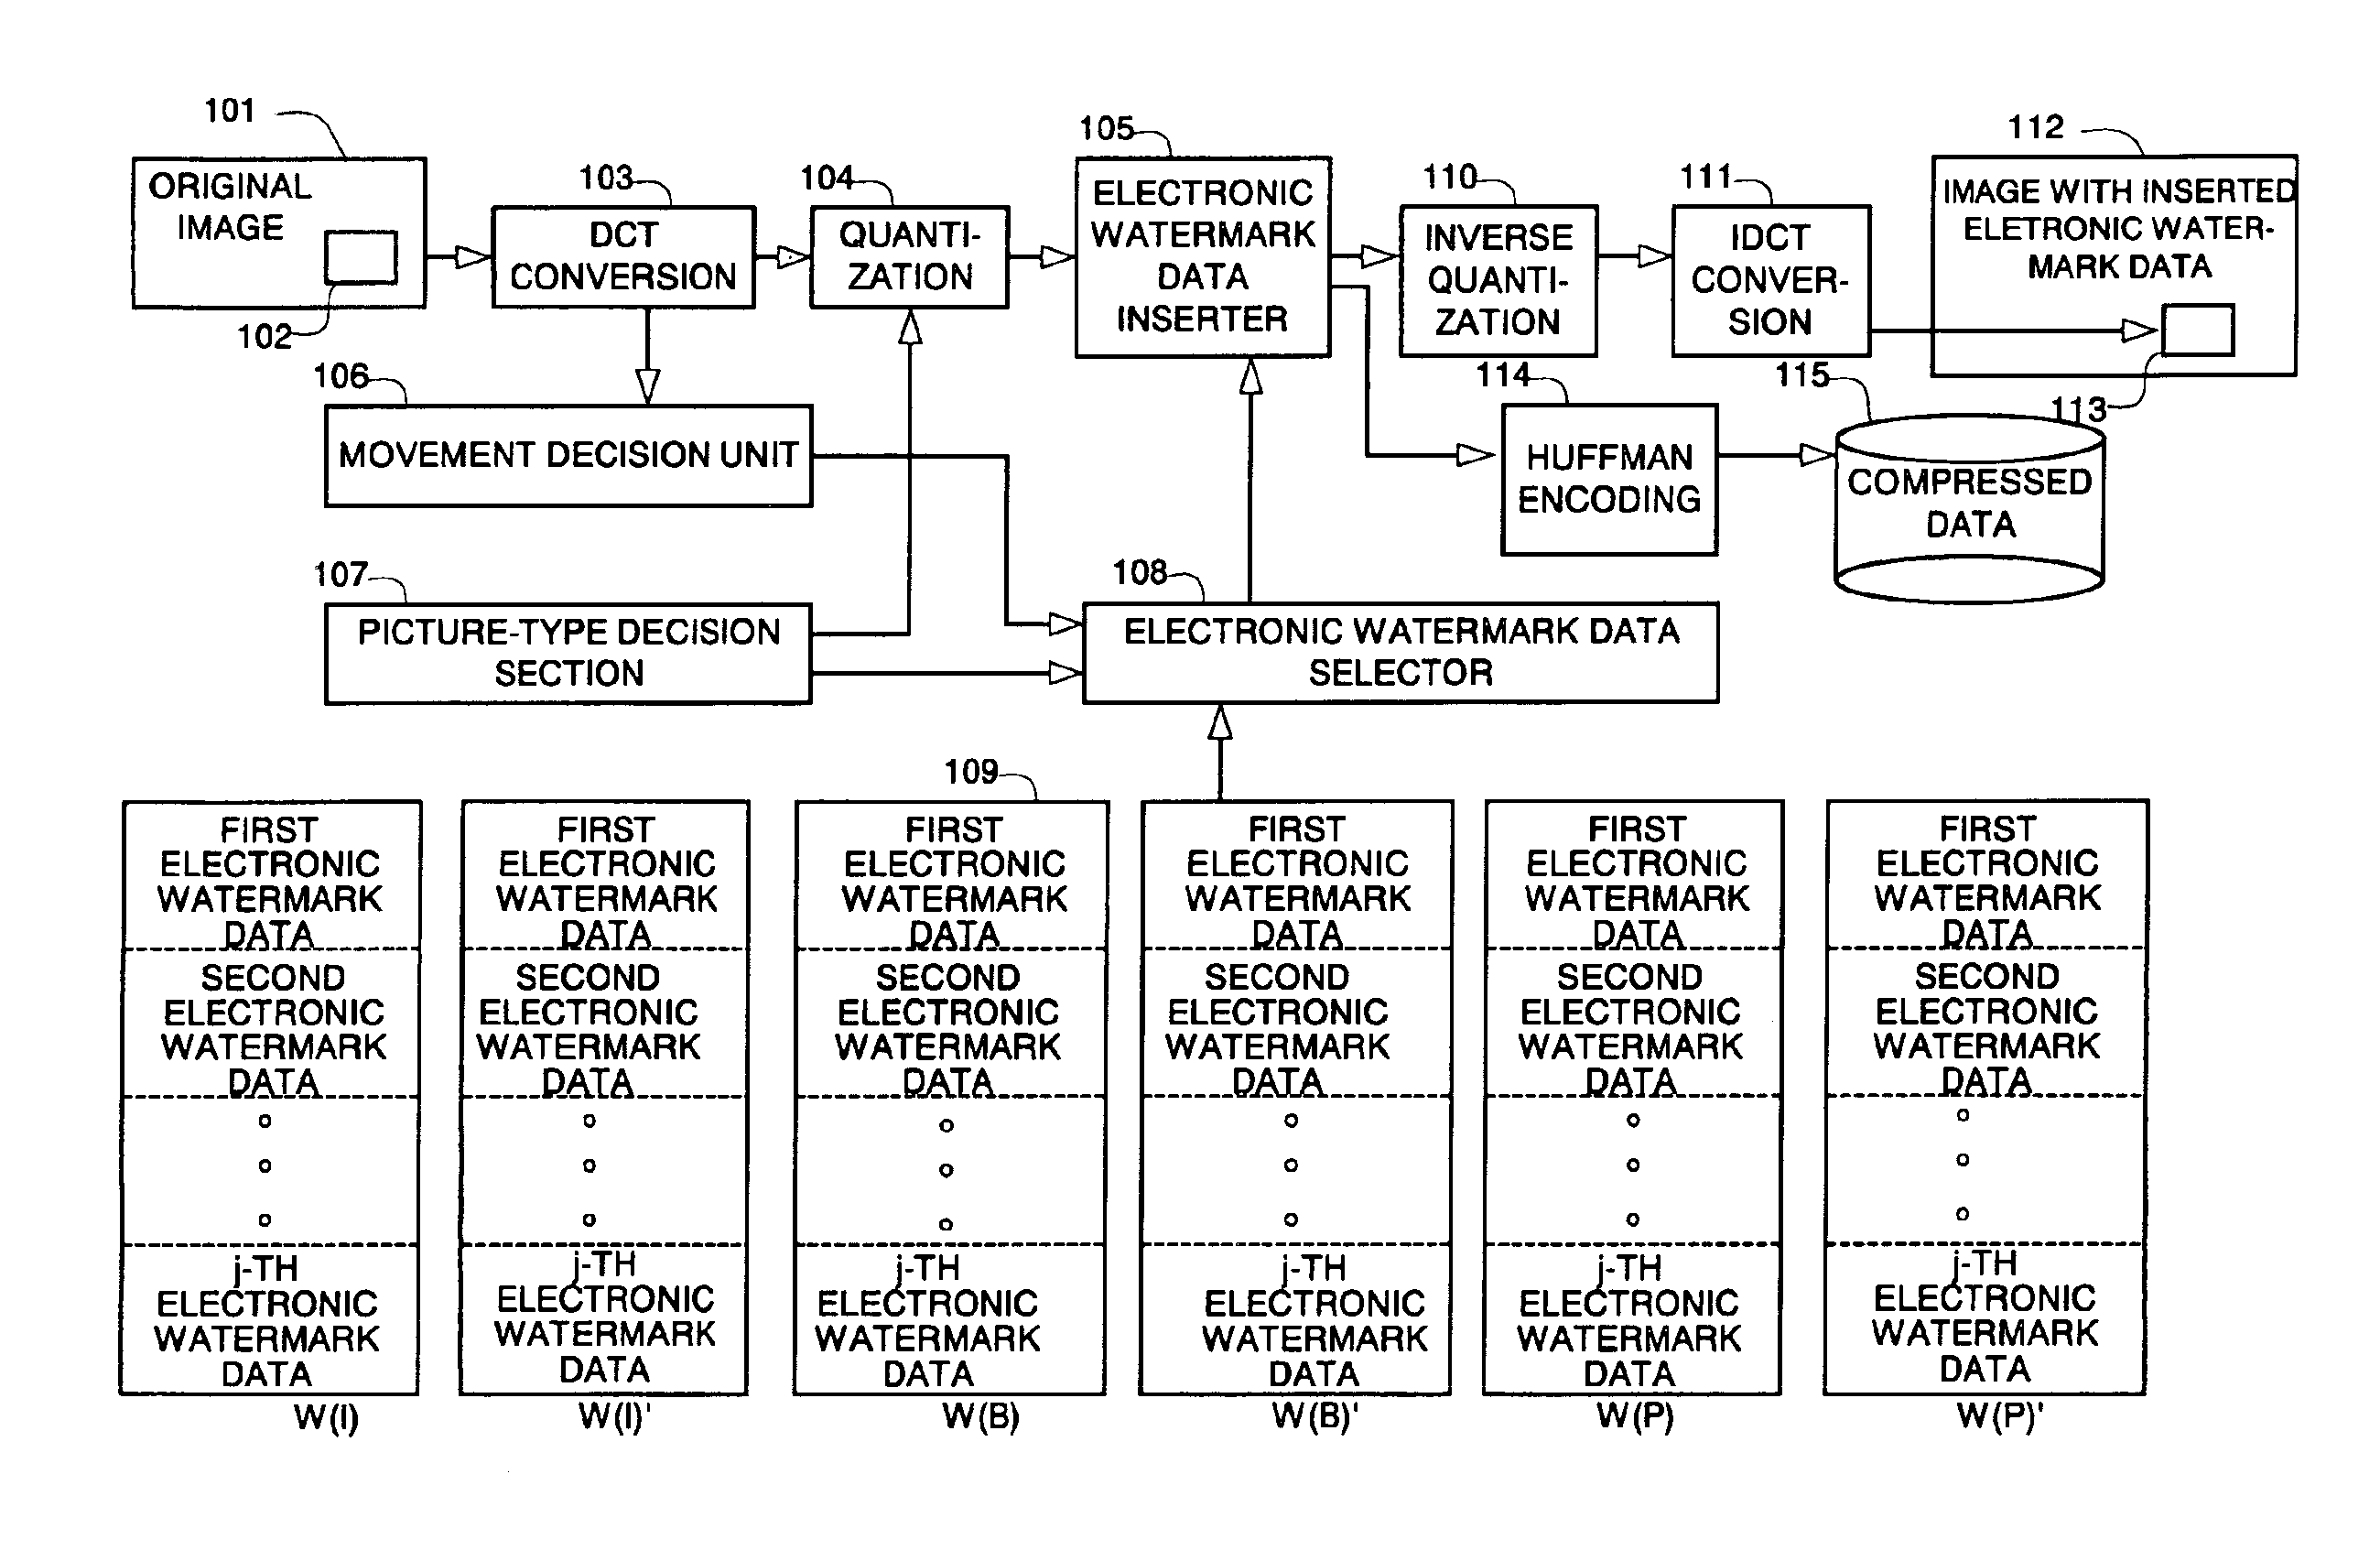 System and apparatus for inserting electronic watermark data